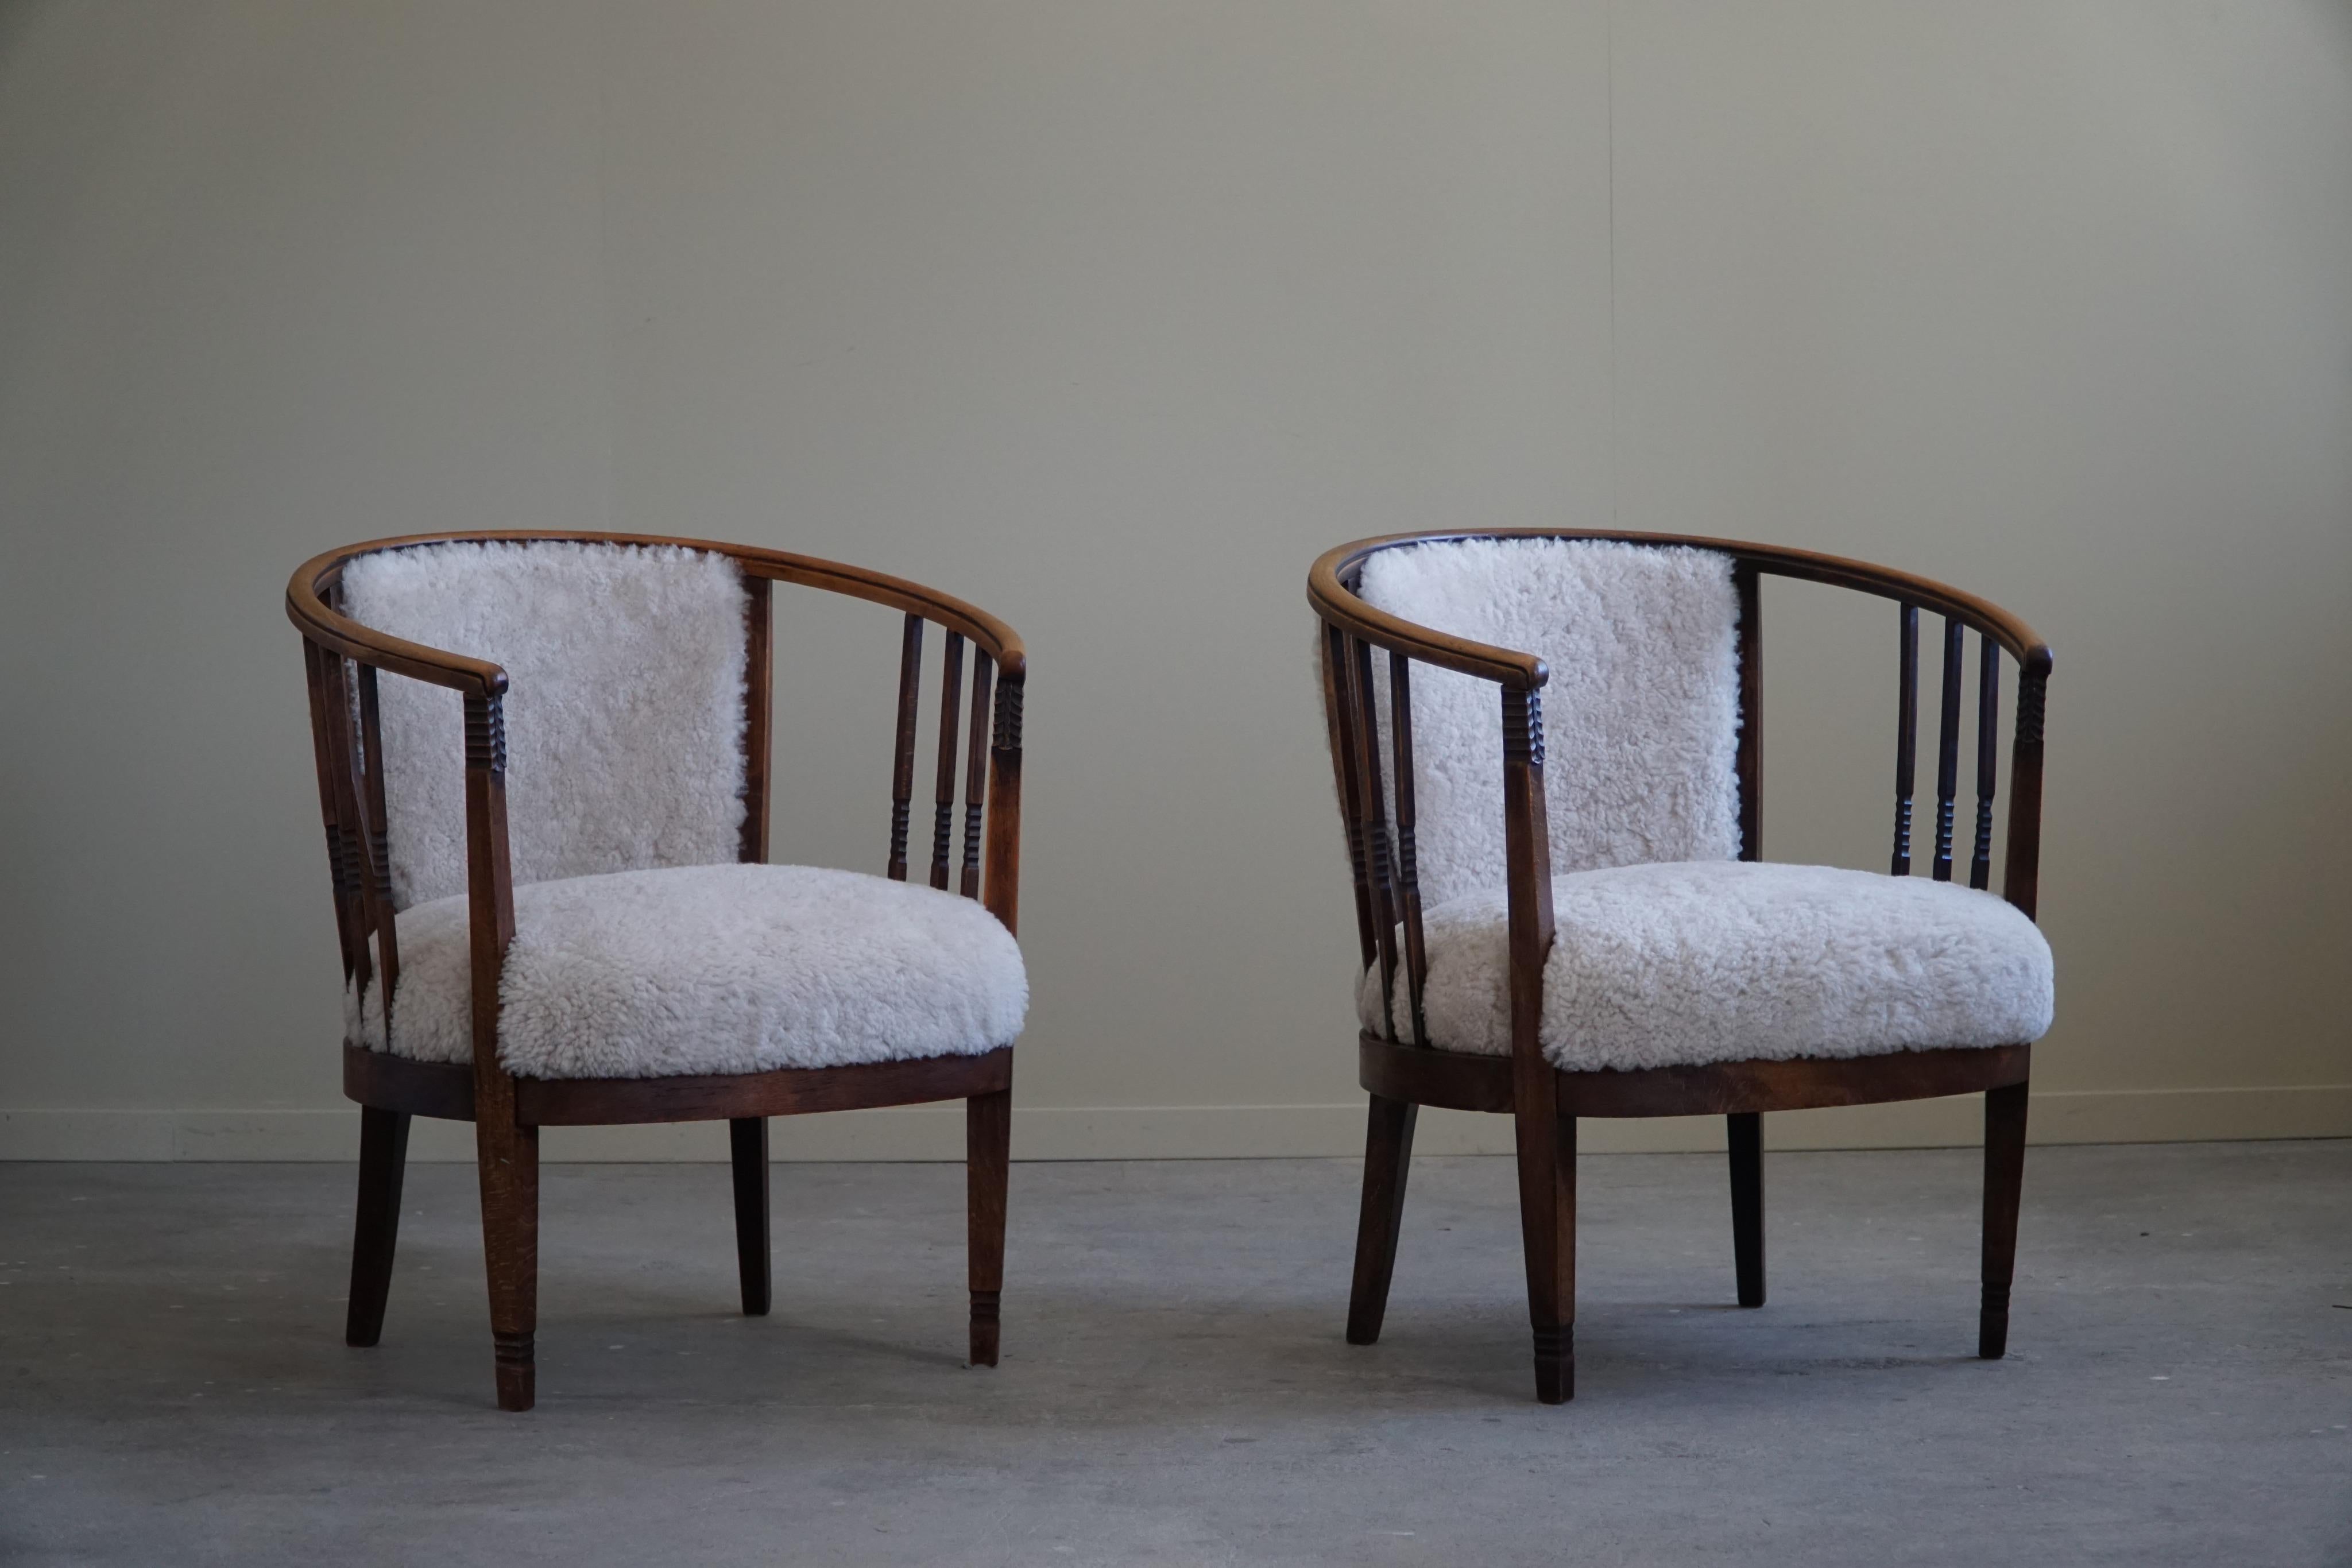 Pair of Danish Armchairs in Beech, Reupholstered Lambswool, Jugendstil, 1900s For Sale 10